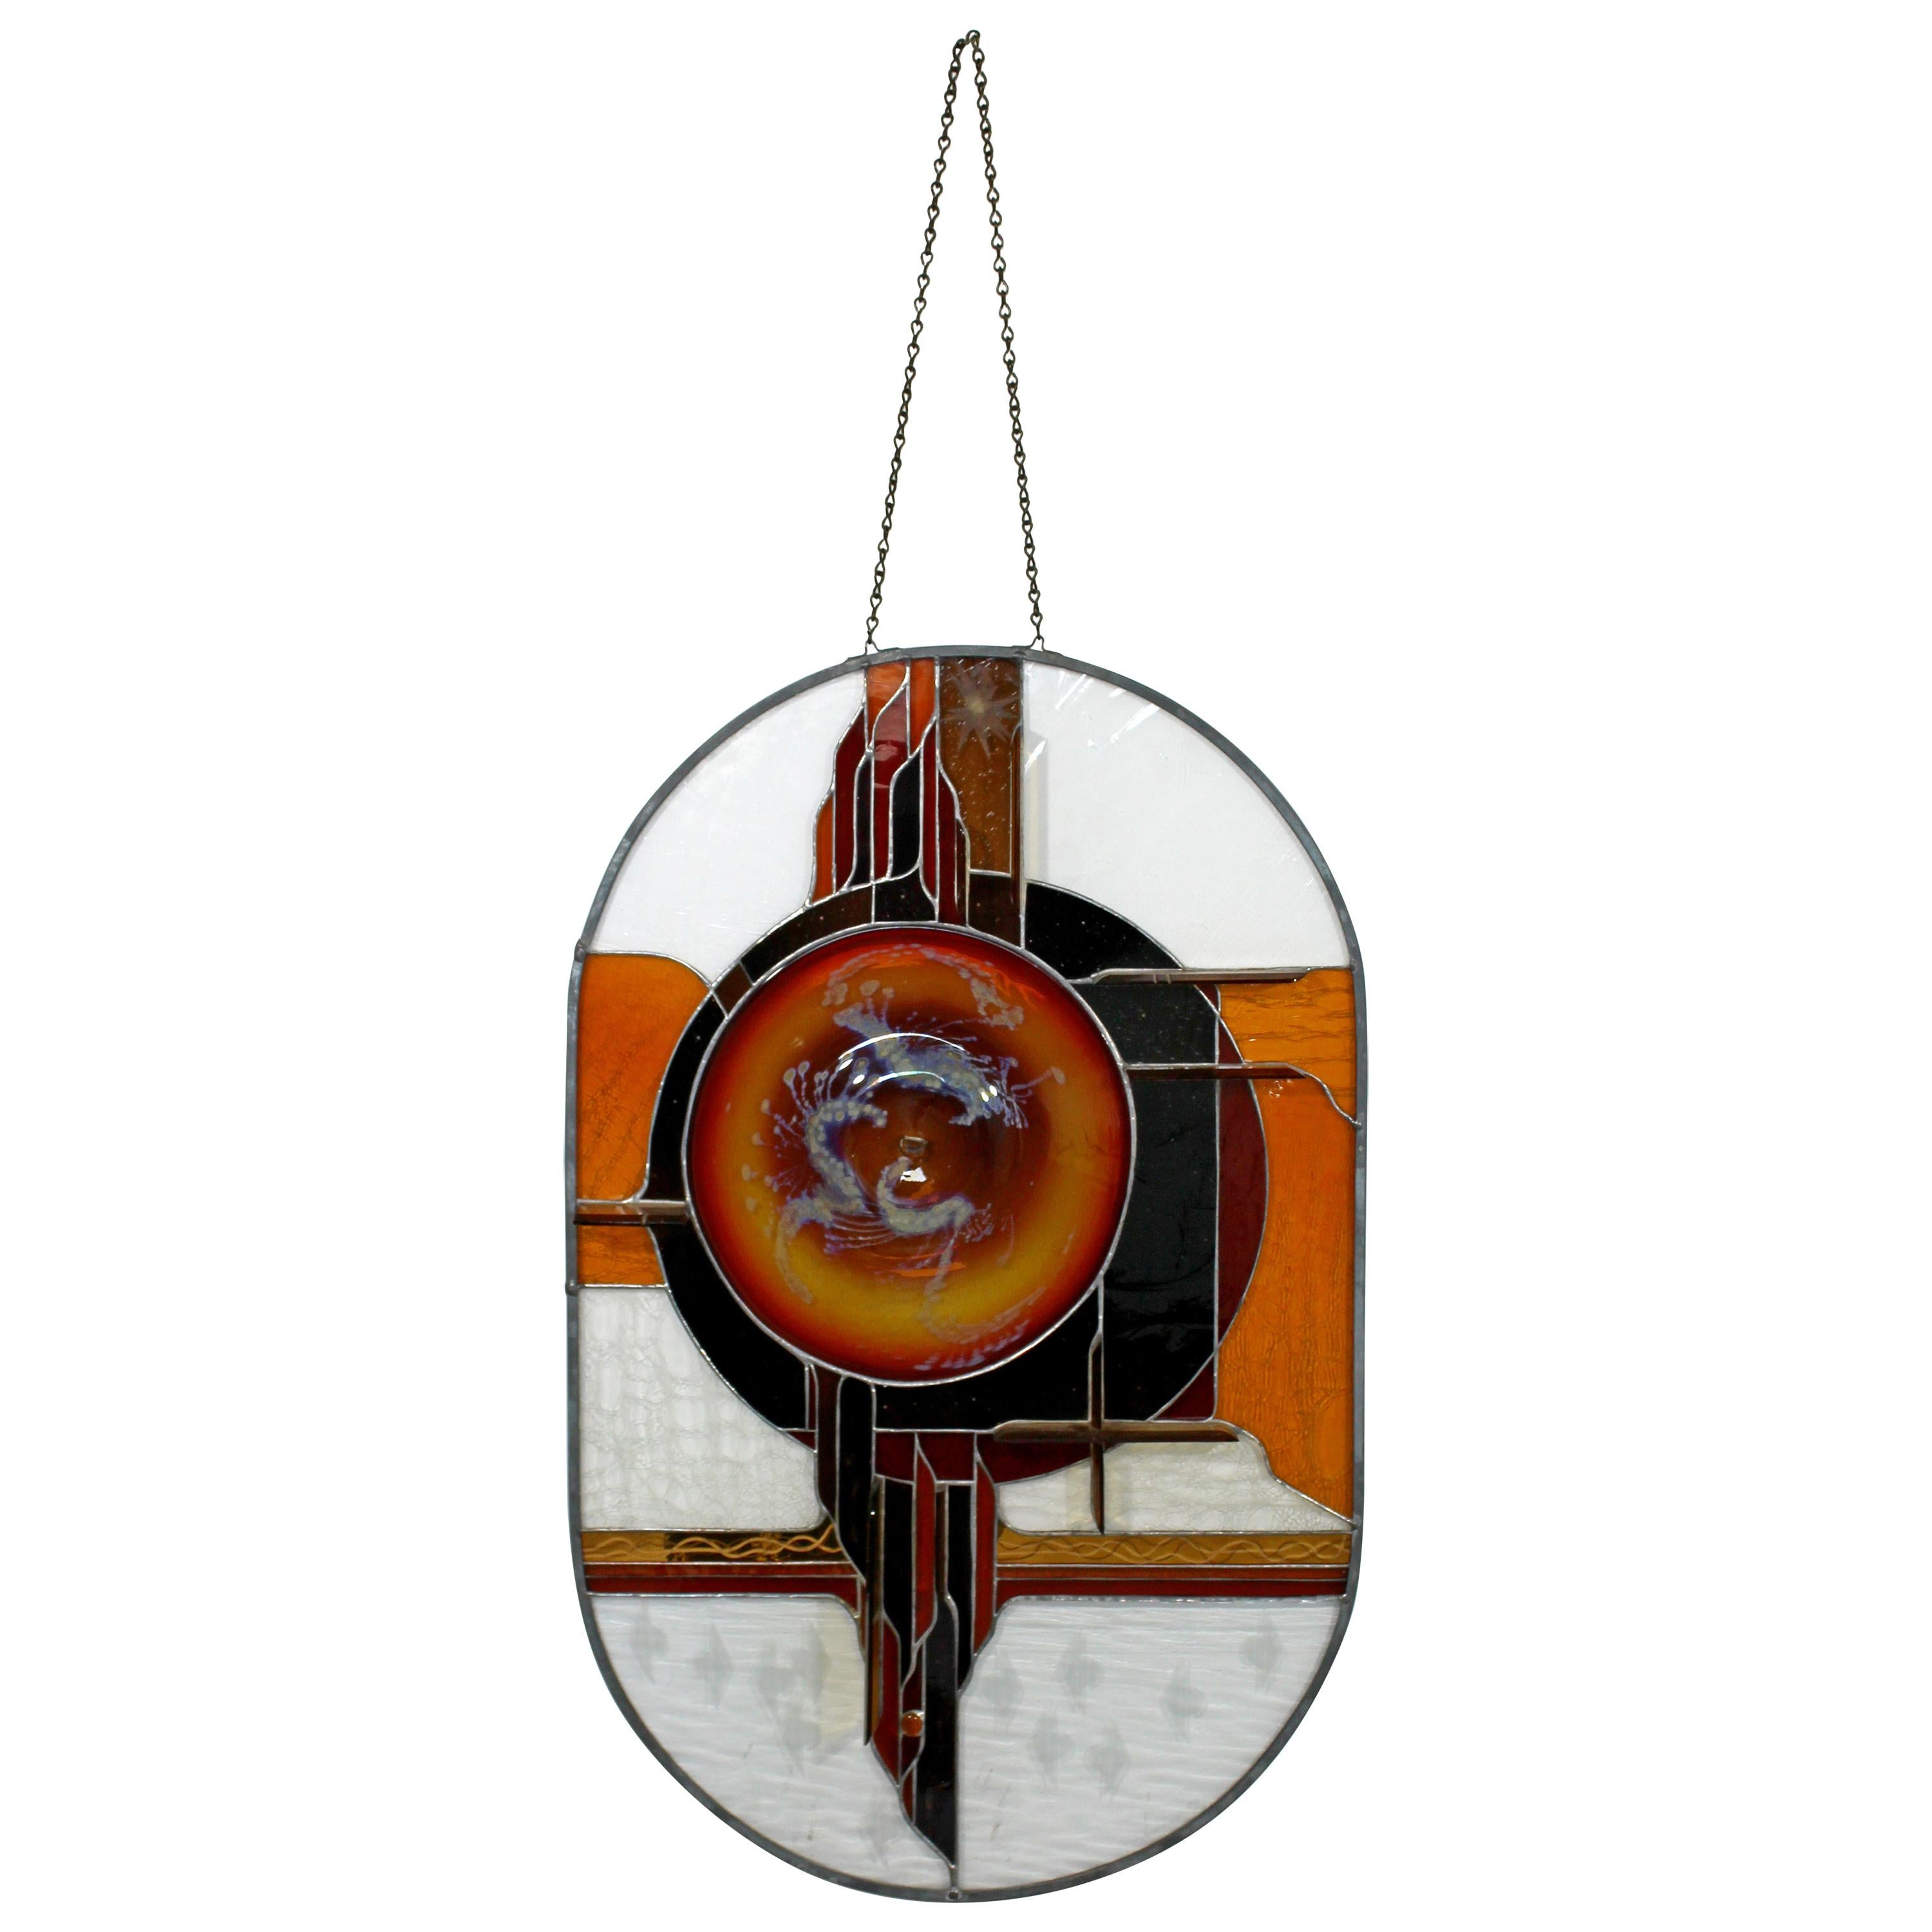 Contemporary Modern Toland Sands Stained Glass Wall Art Hanging Sculpture 1980s